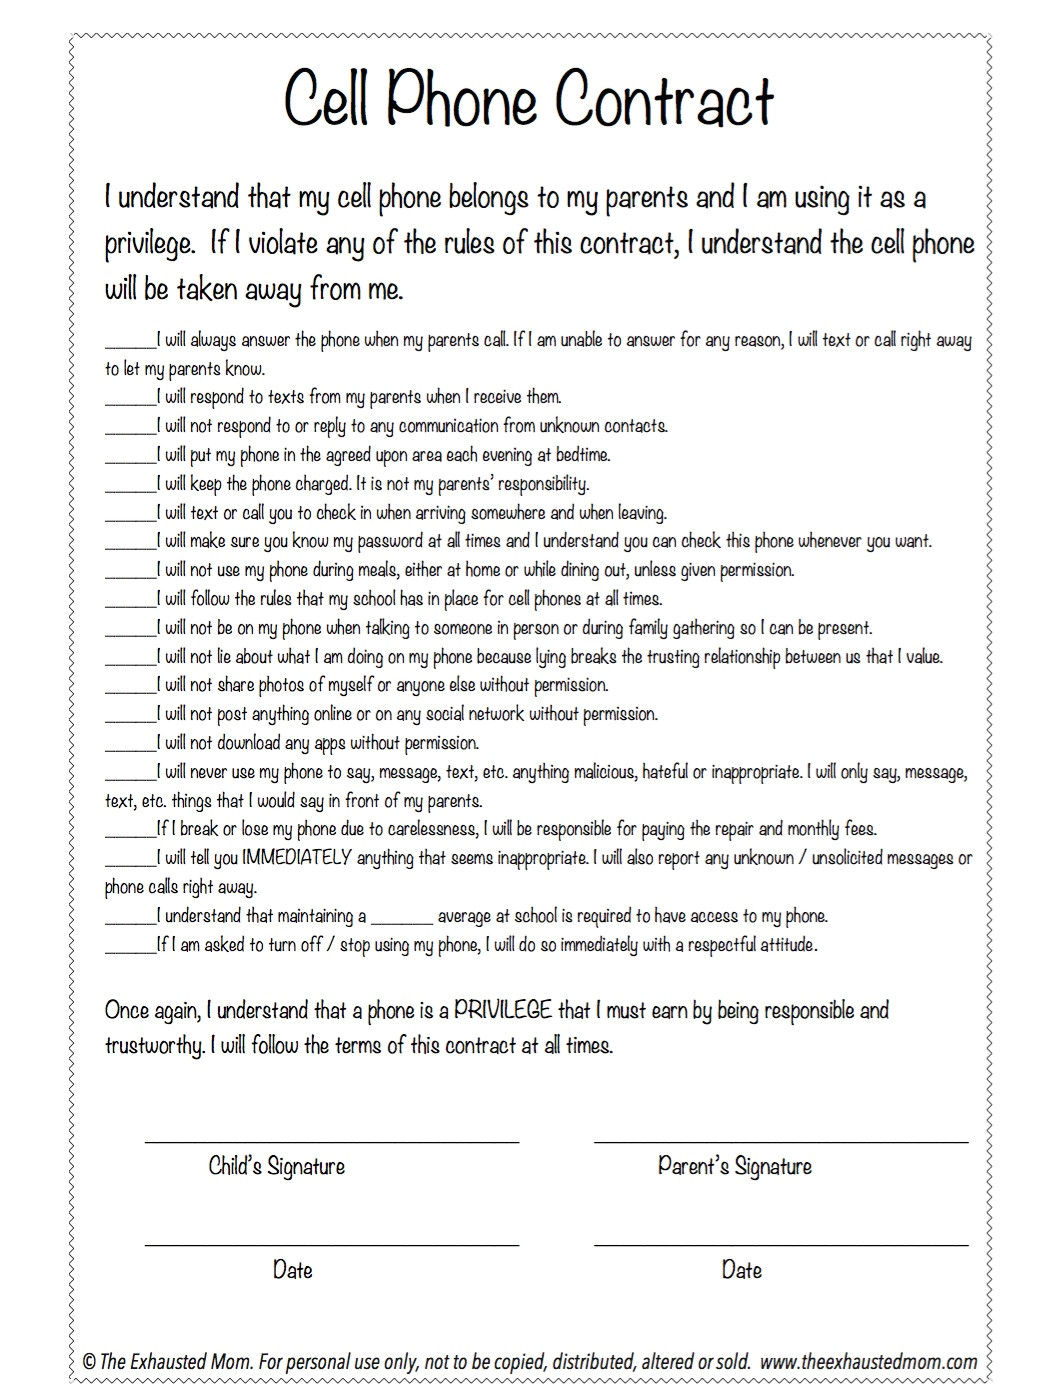 Cell Phone Contract Template Cell Phone Contract for Tweens the Exhausted Mom